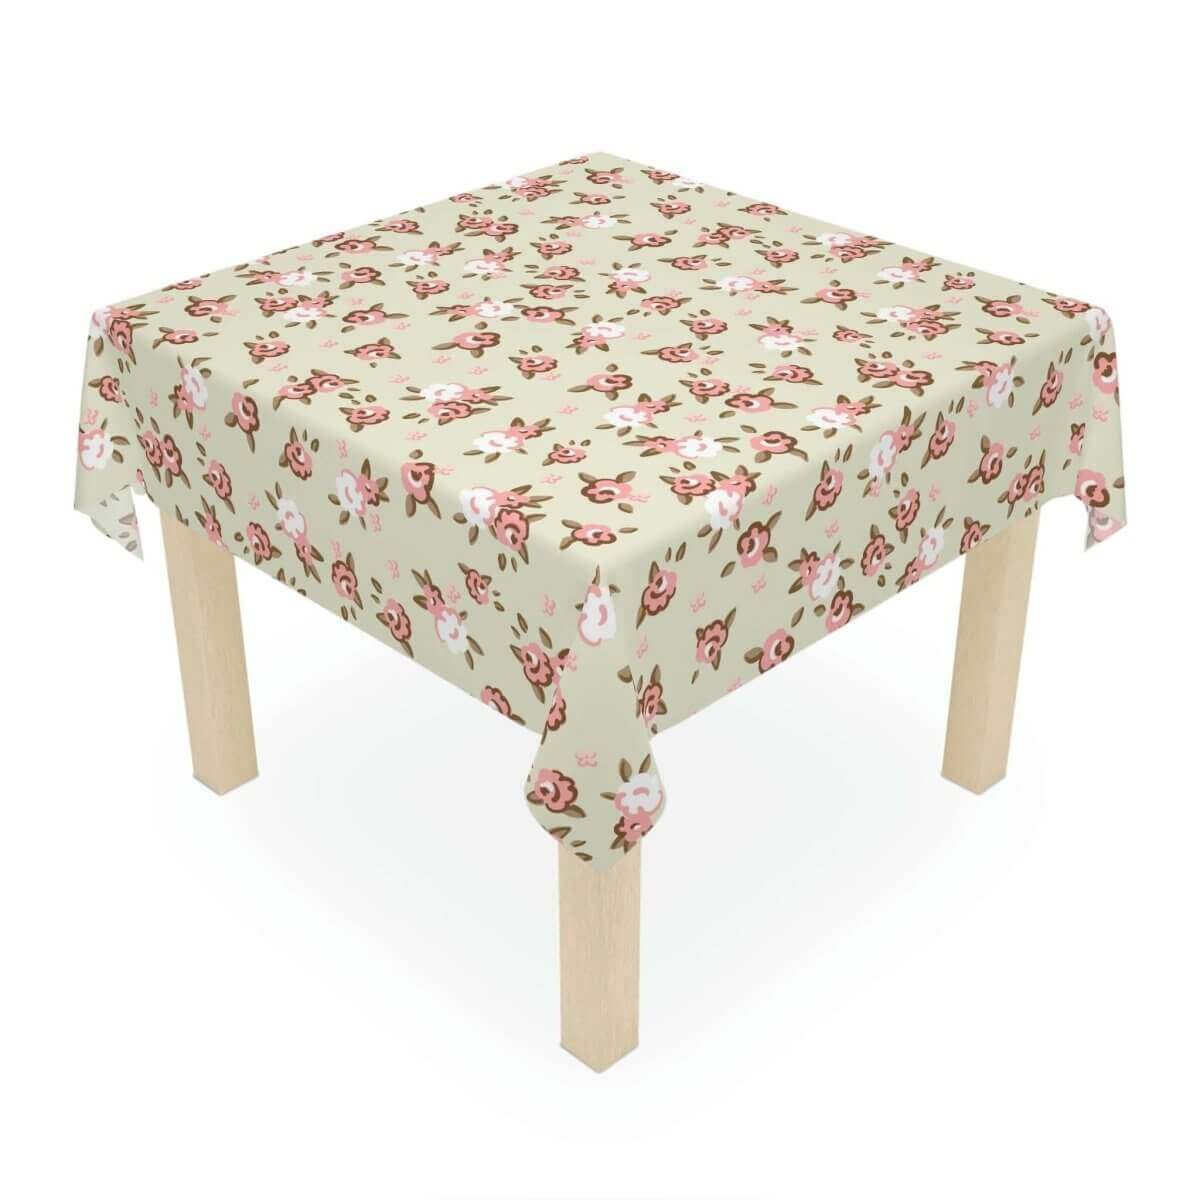 Floral Tablecloth - Hearth Home & Living